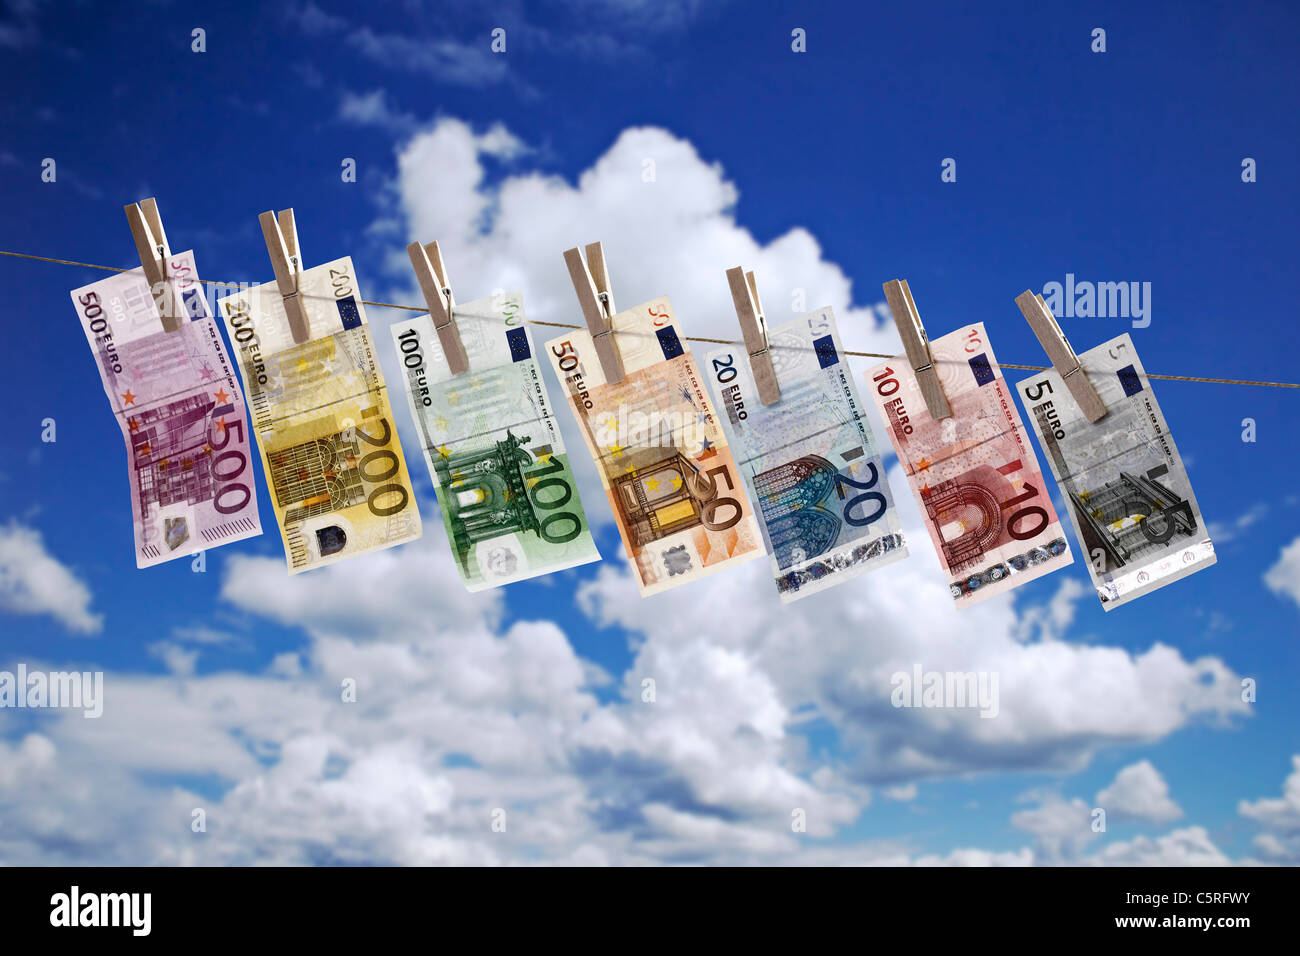 Different Euro bank notes hanging on clothesline against cloudy sky Stock Photo